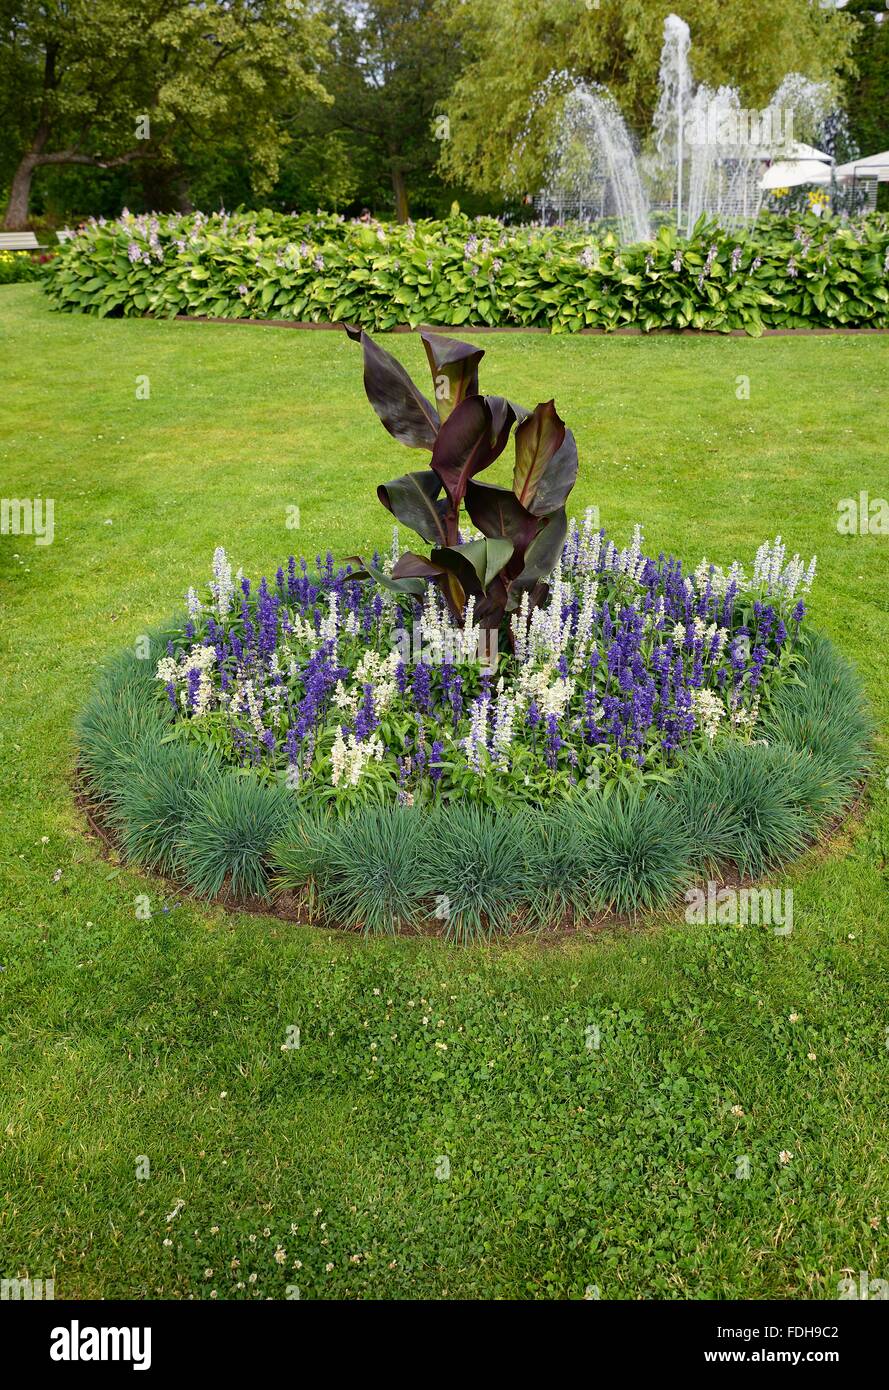 Flowerbed in park Stock Photo